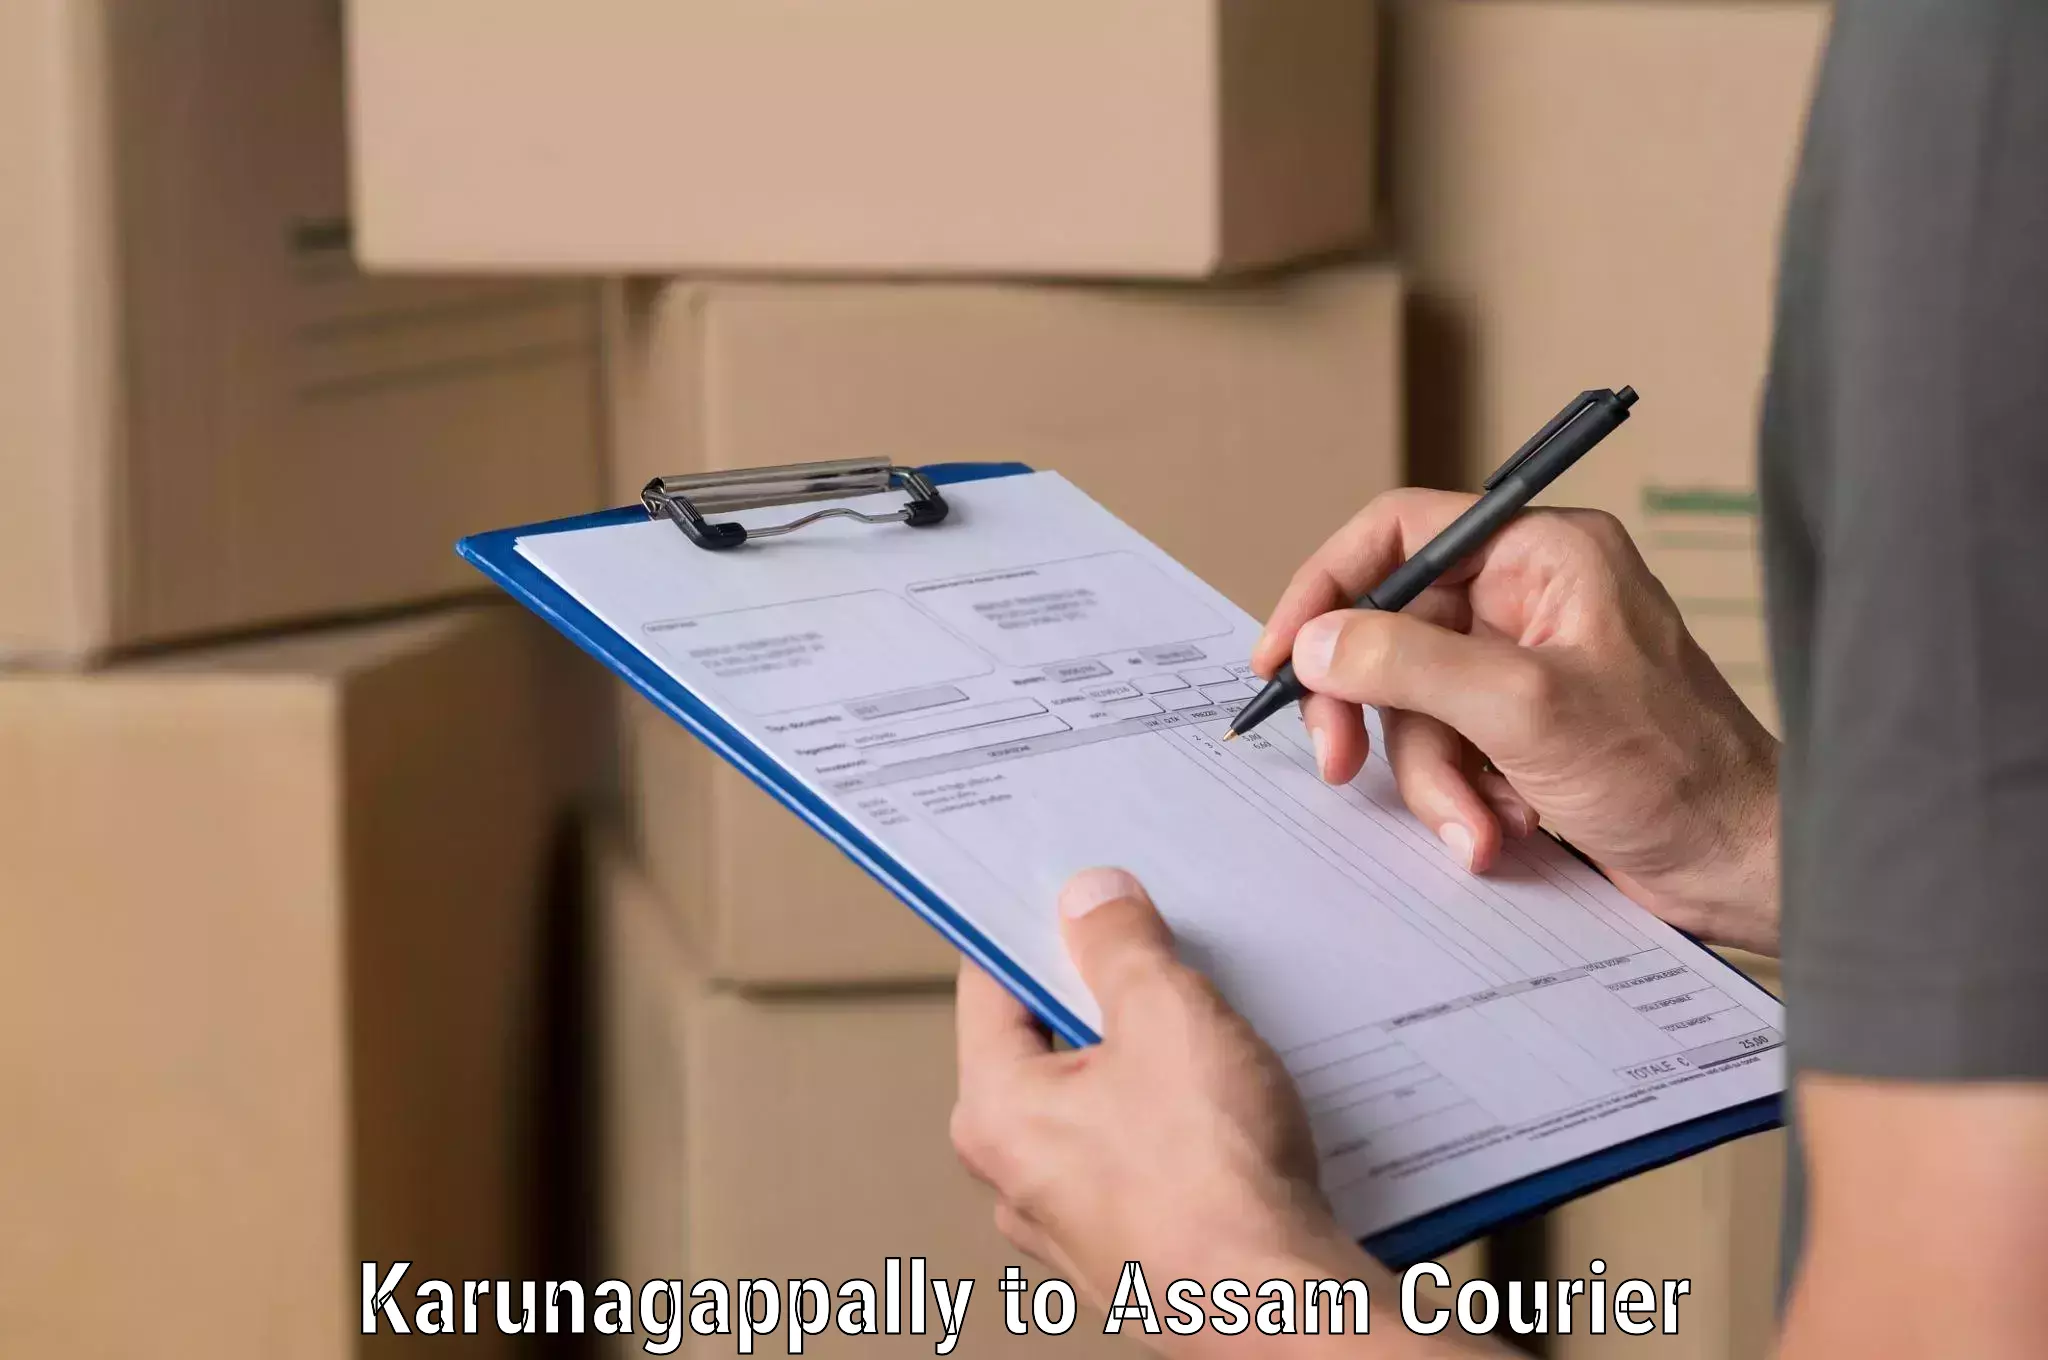 Online package tracking Karunagappally to Lala Assam